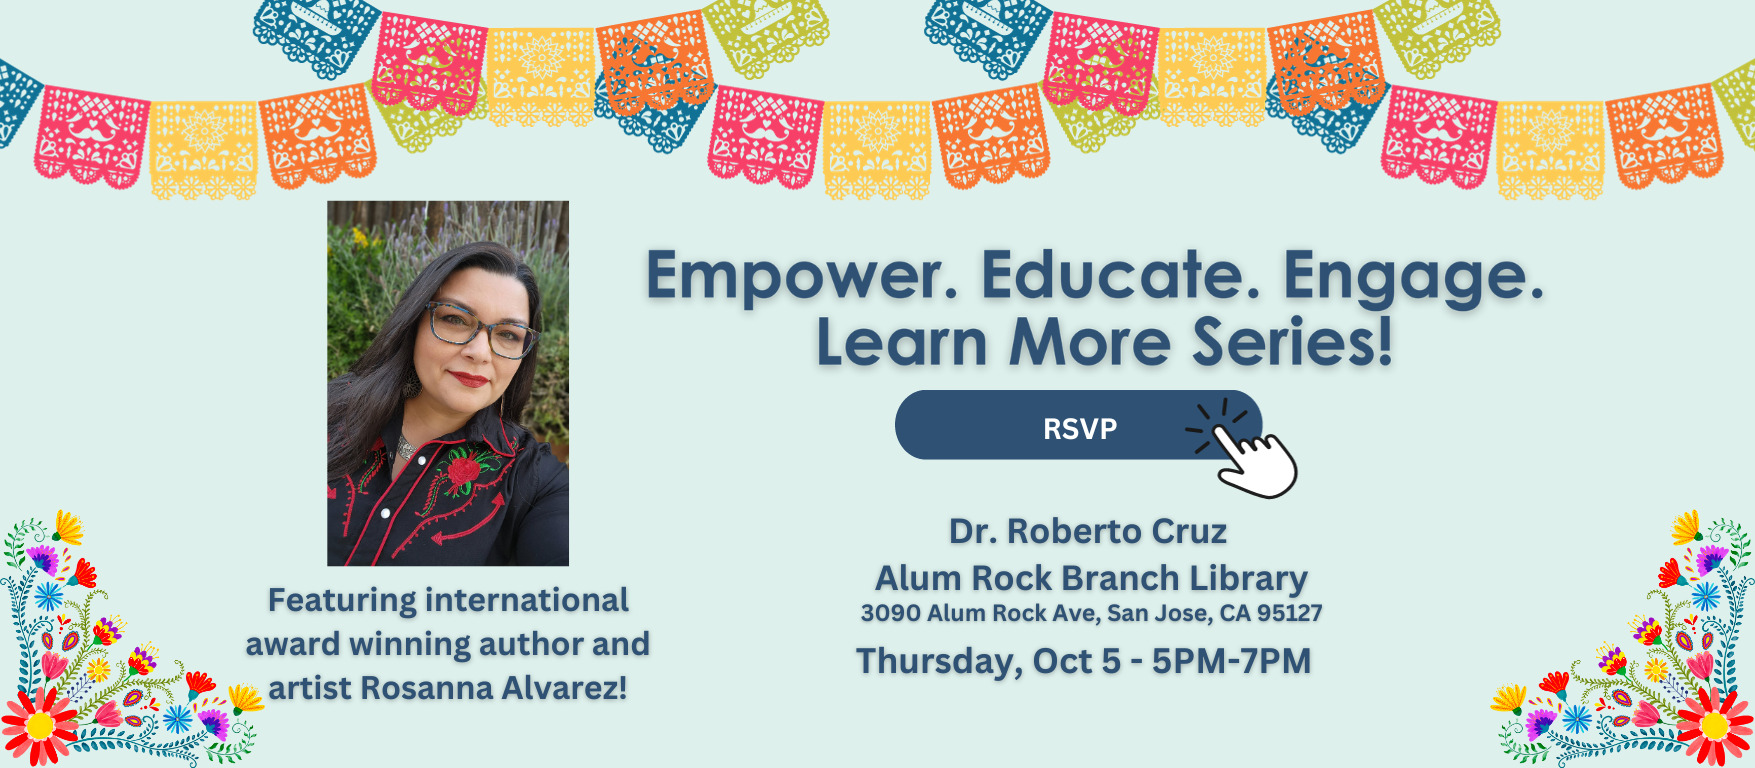 An invitation to clip on the image to RSVP to SJPLF's Learn More Series. The image features a picture of local author and artist Rosanna Alvarez, who will be speaking at the event.